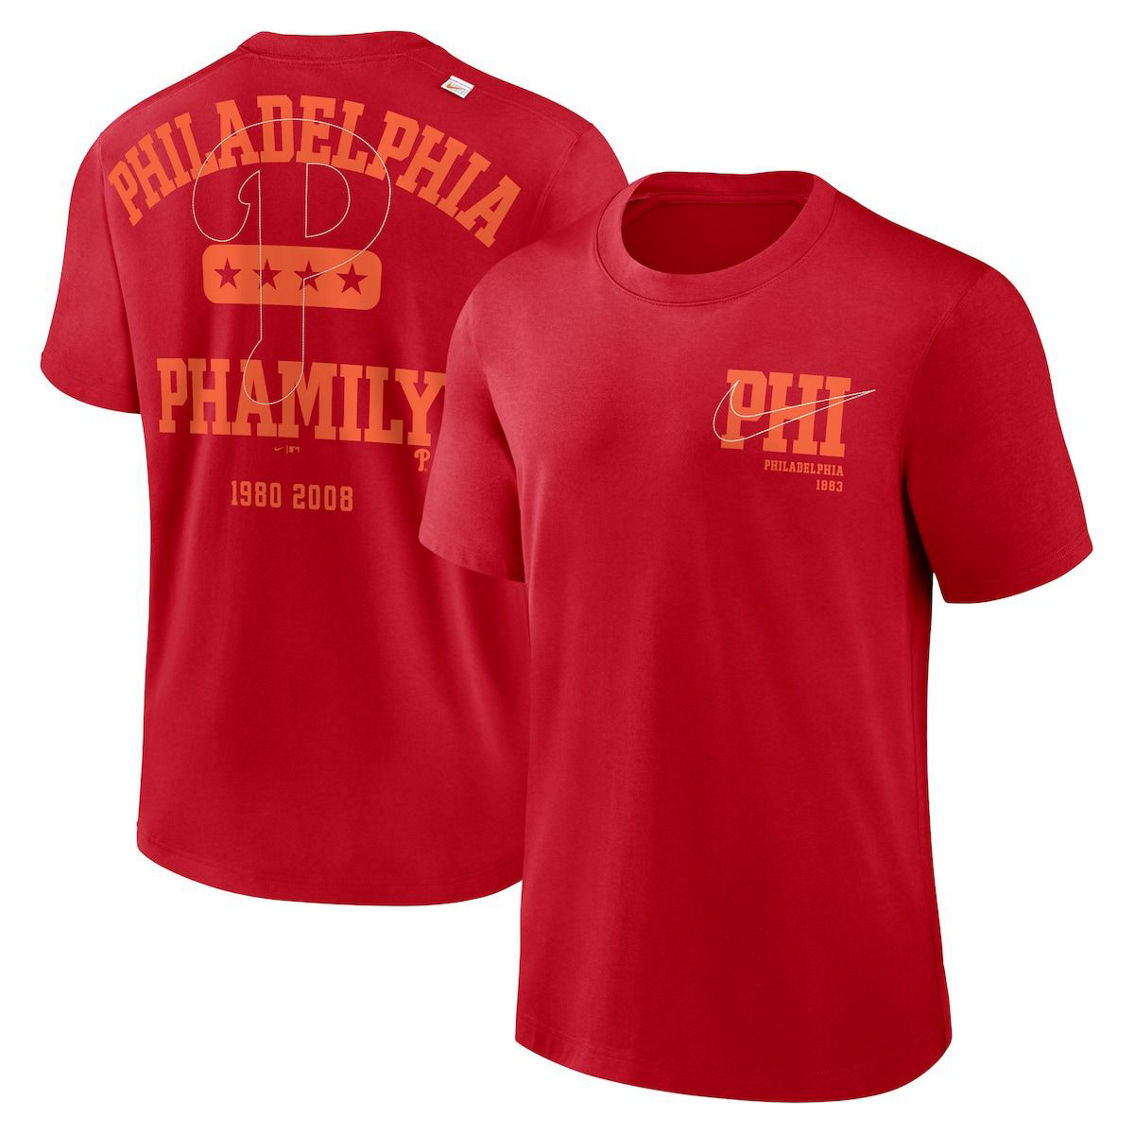 Nike Men's Red Philadelphia Phillies Statement Game Over T-Shirt - Image 2 of 4